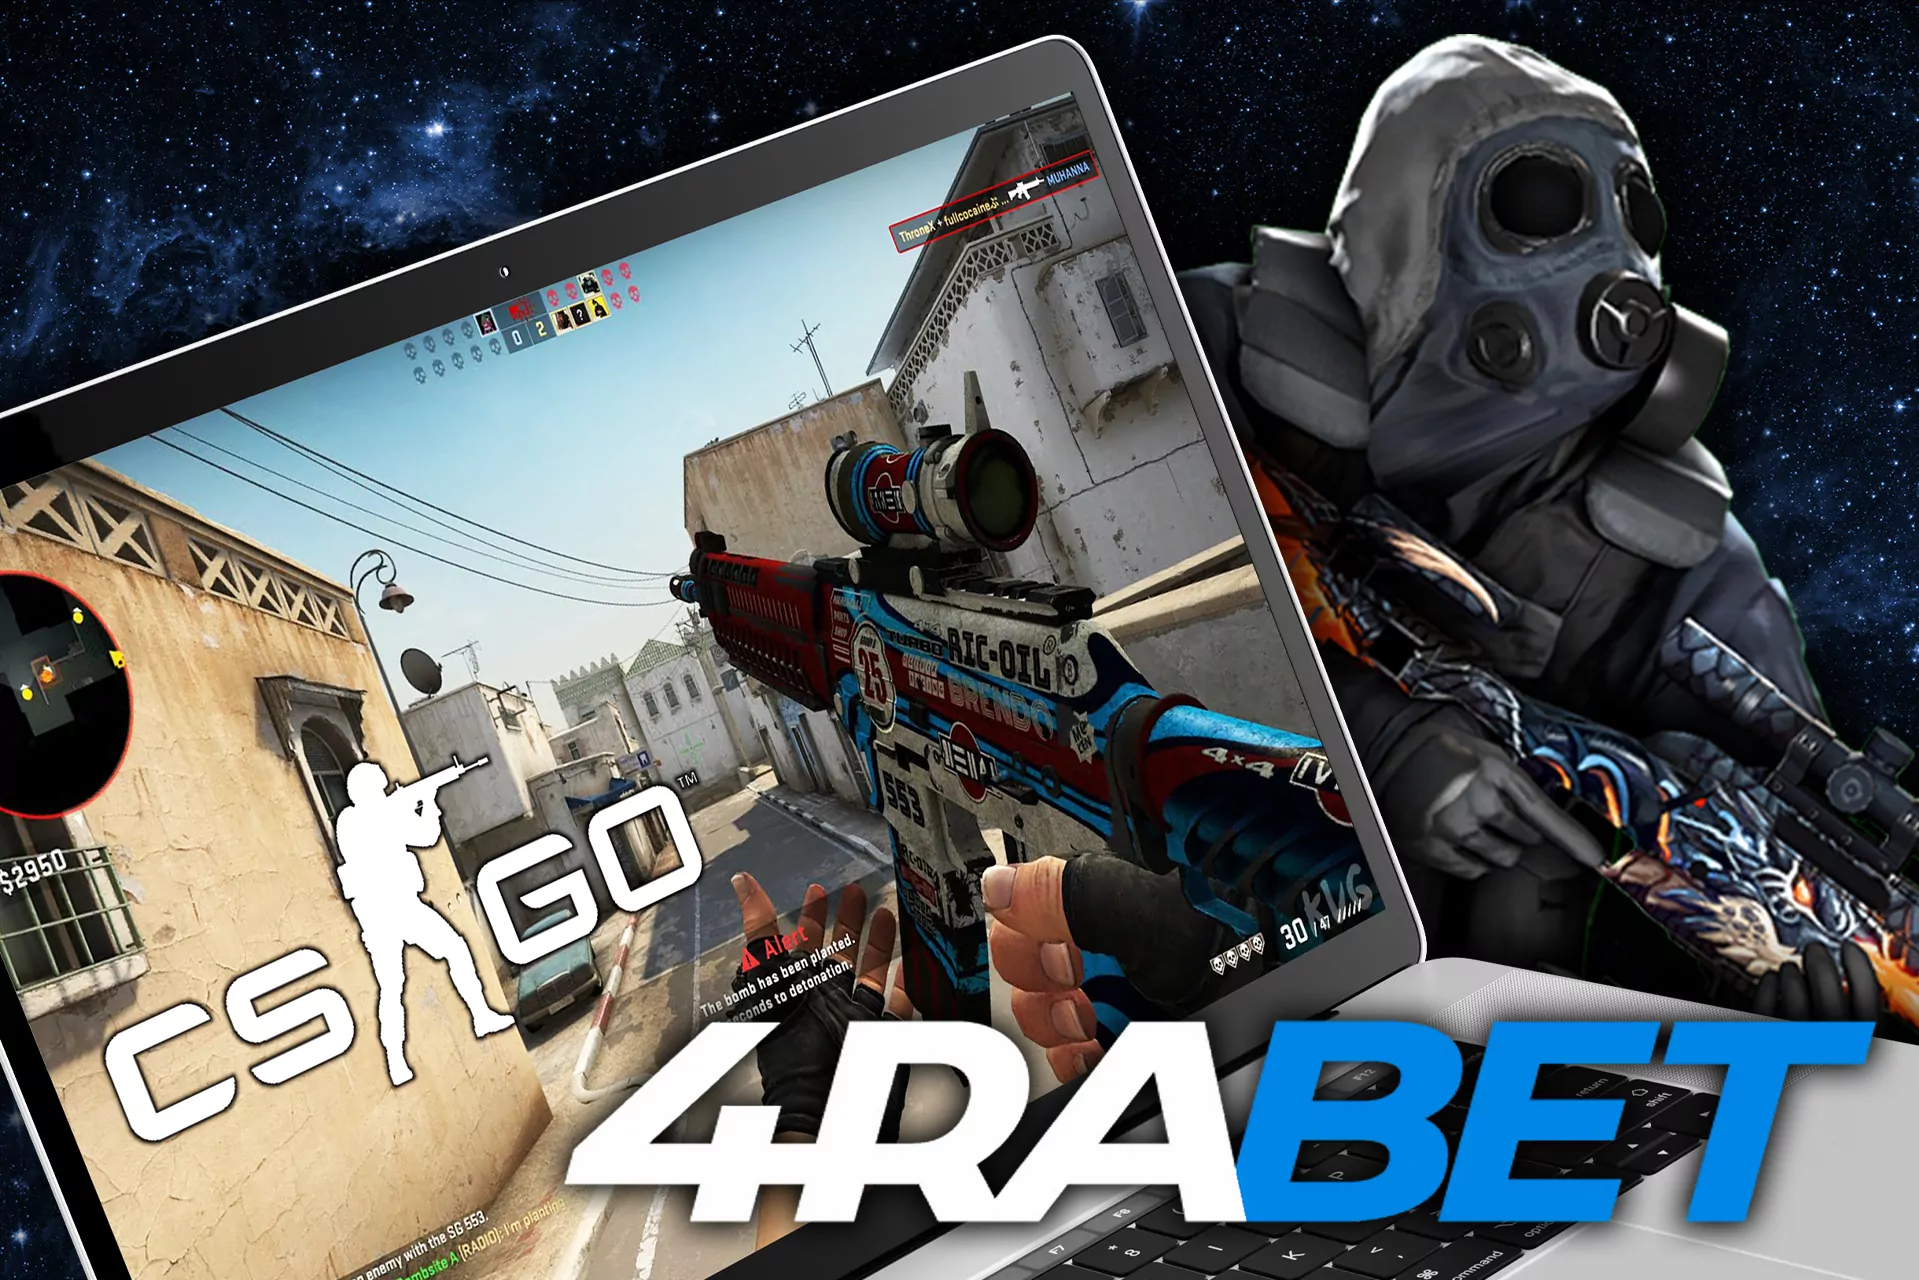 Watch CS:GO matches and place bets on it.